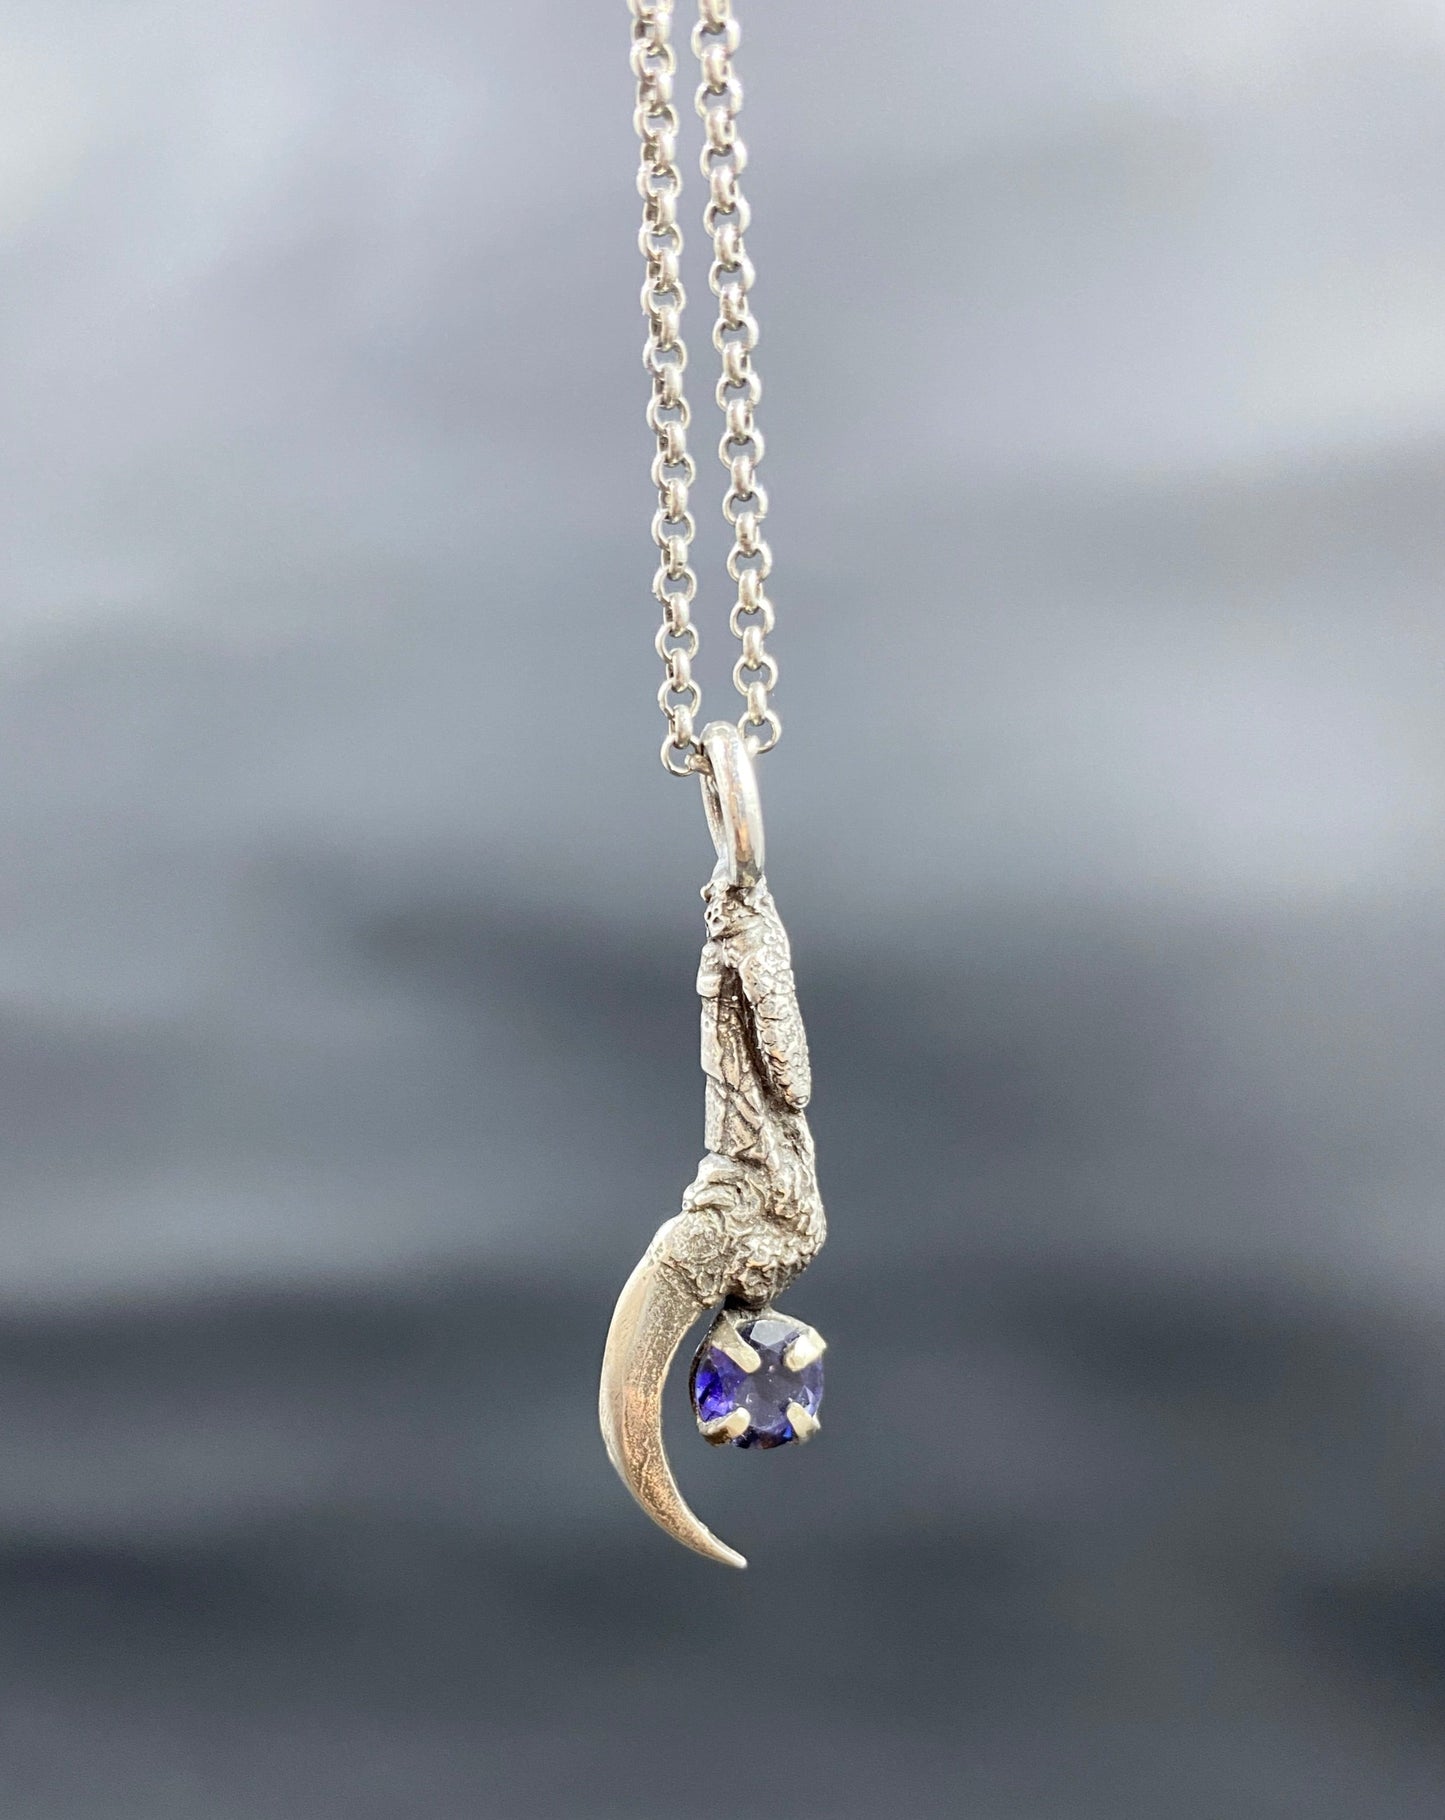 Large Silver Crow Talon Necklace with Iolite